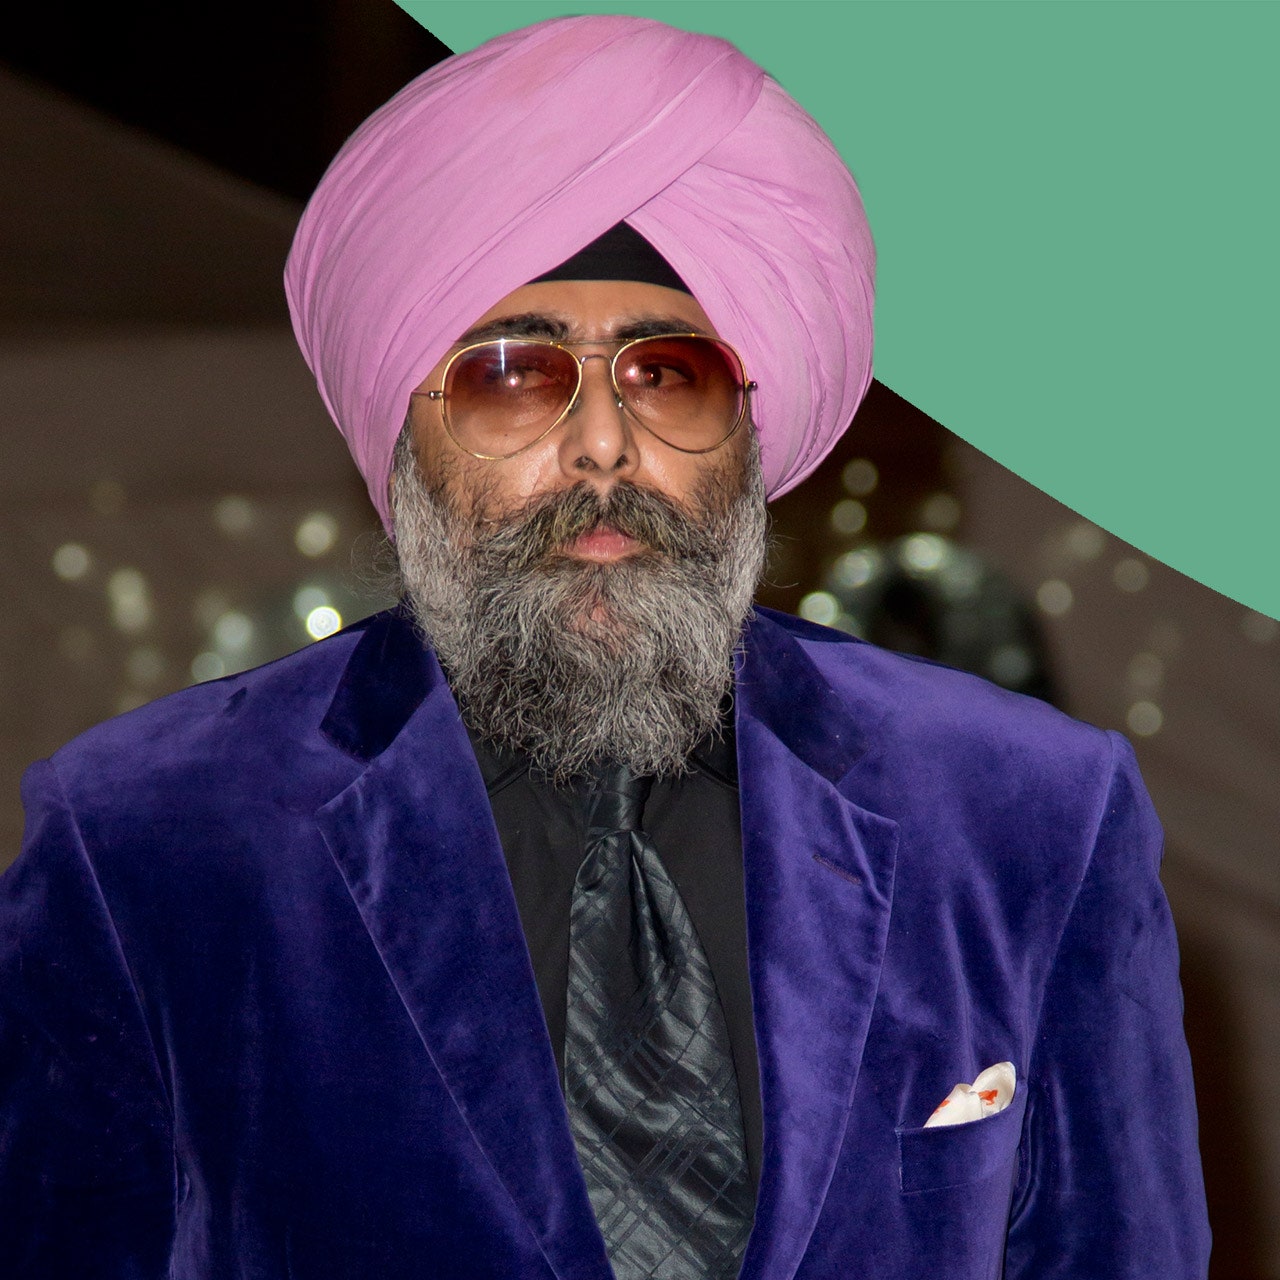 Is Hardeep Singh Kohli’s arrest for sexual offences the start of a #MeToo moment in comedy?